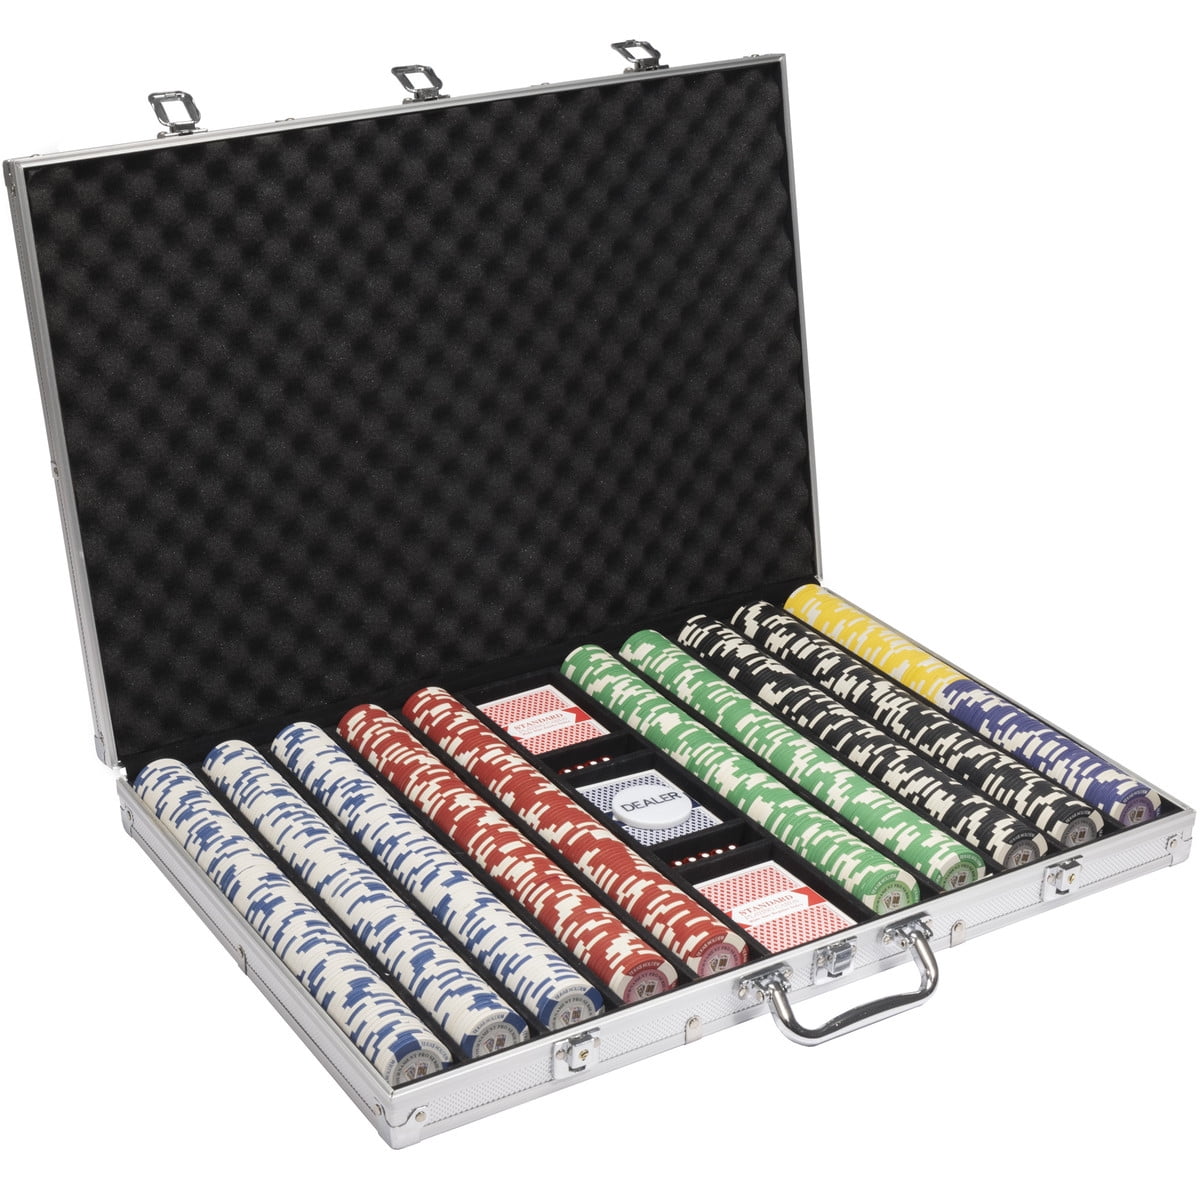 Pick Chips! New 1000 Suited 11.5g Clay Poker Chips Set with Aluminum Case 